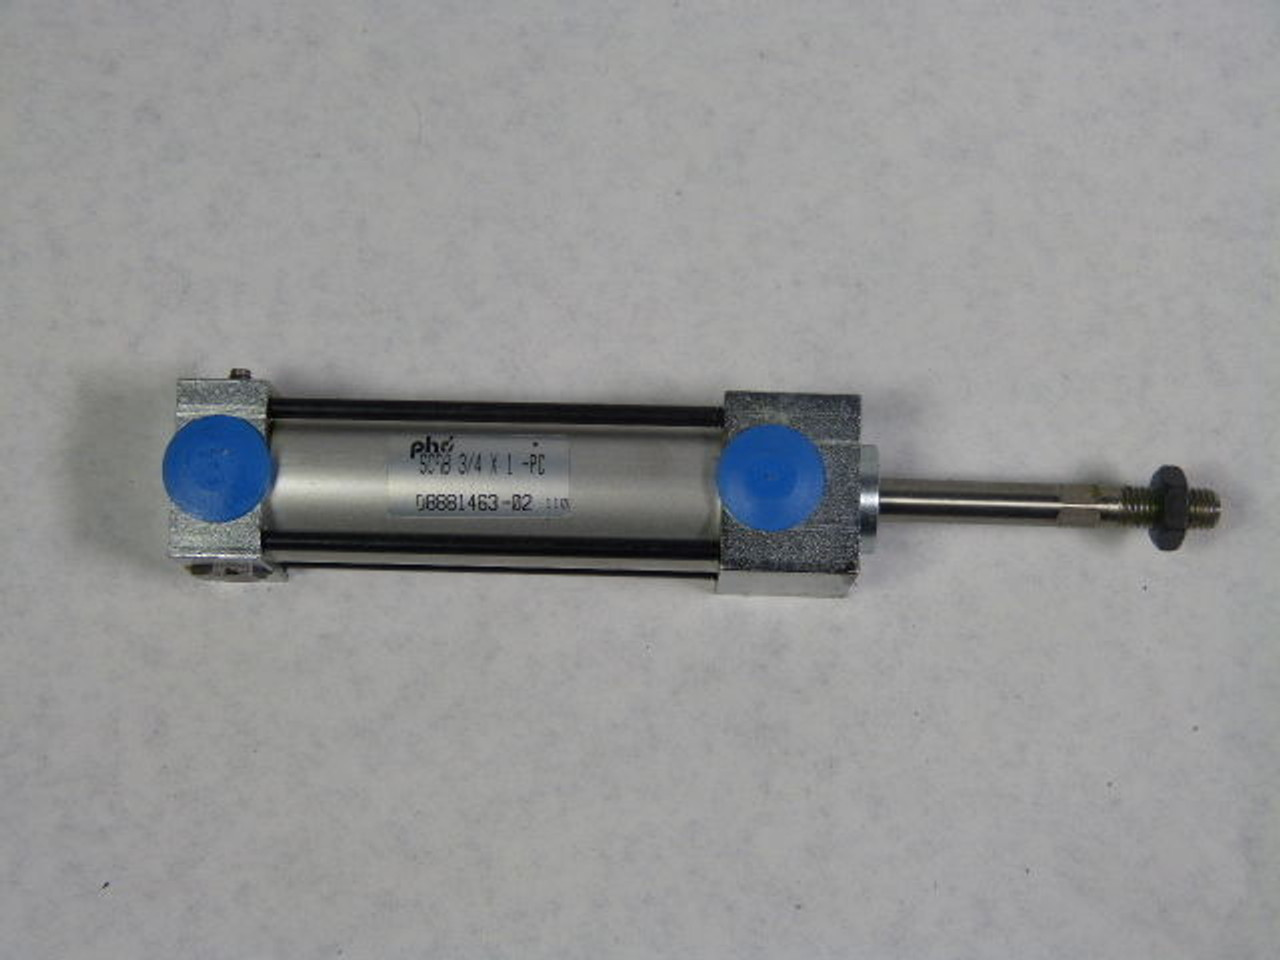 Phd SCAB-3/4x1-PC Pneumatic Cylinder 3/4" Bore 1" Stroke USED